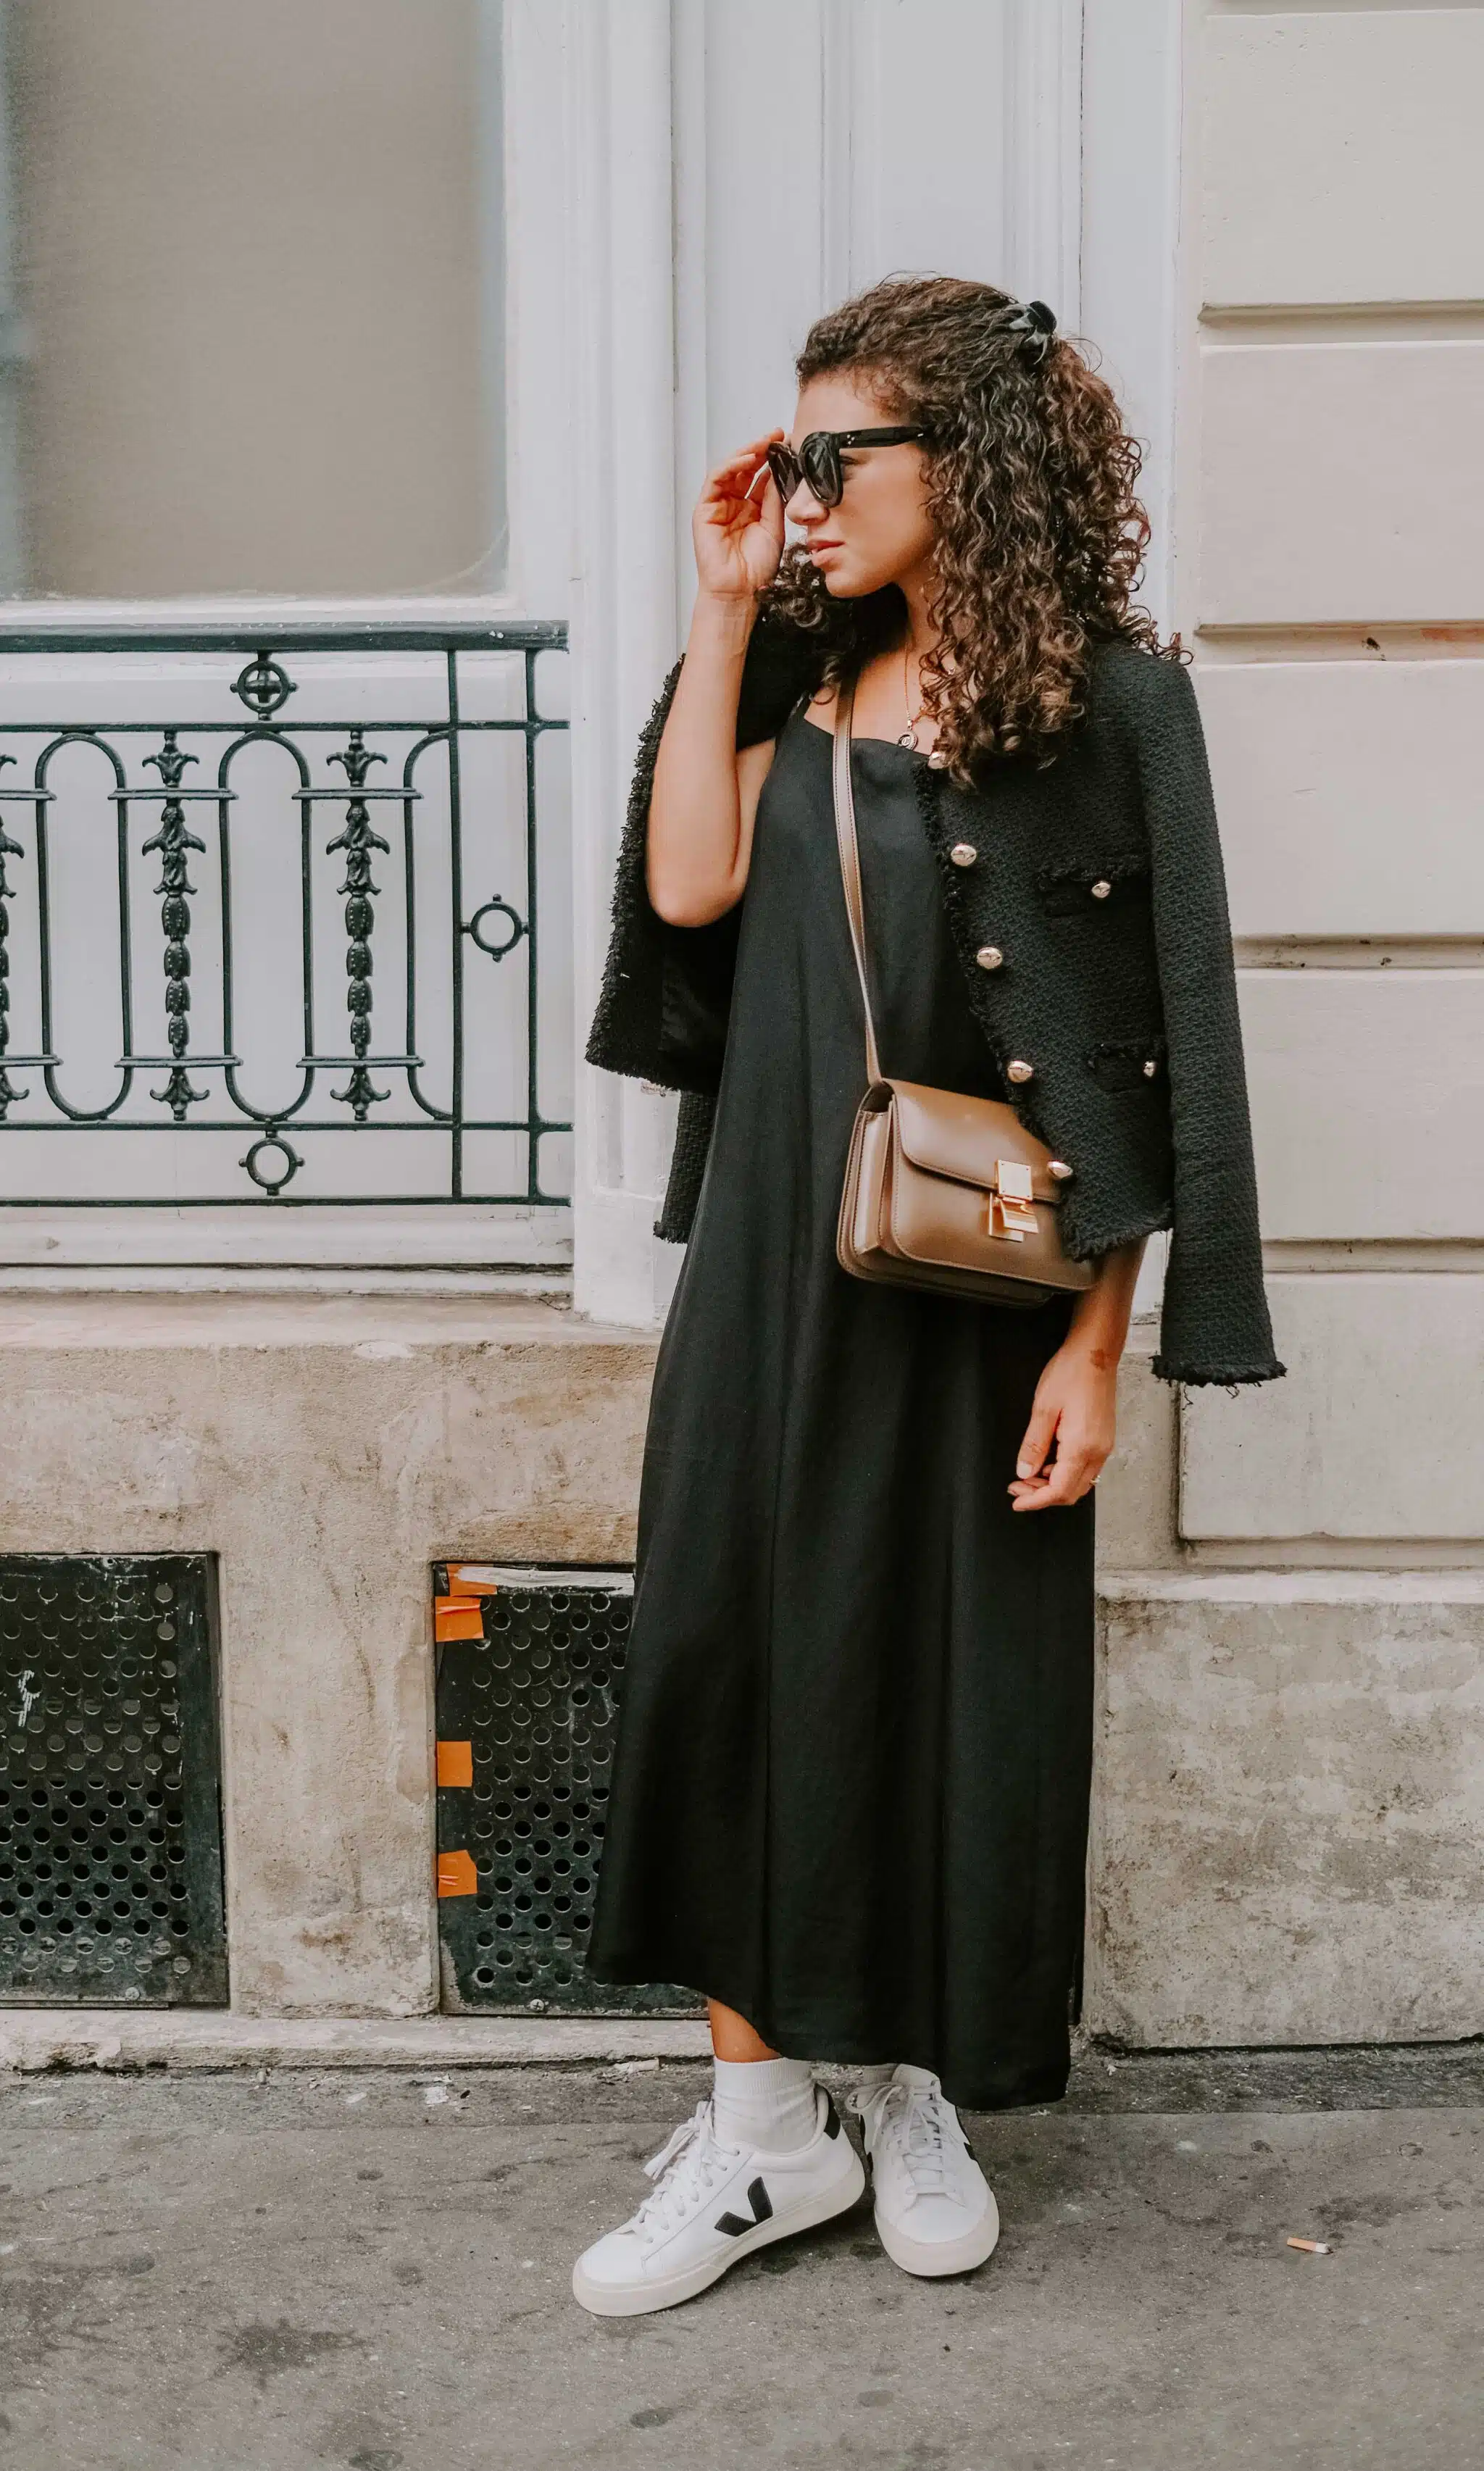 slip dress and lady jacket chic girl outfit